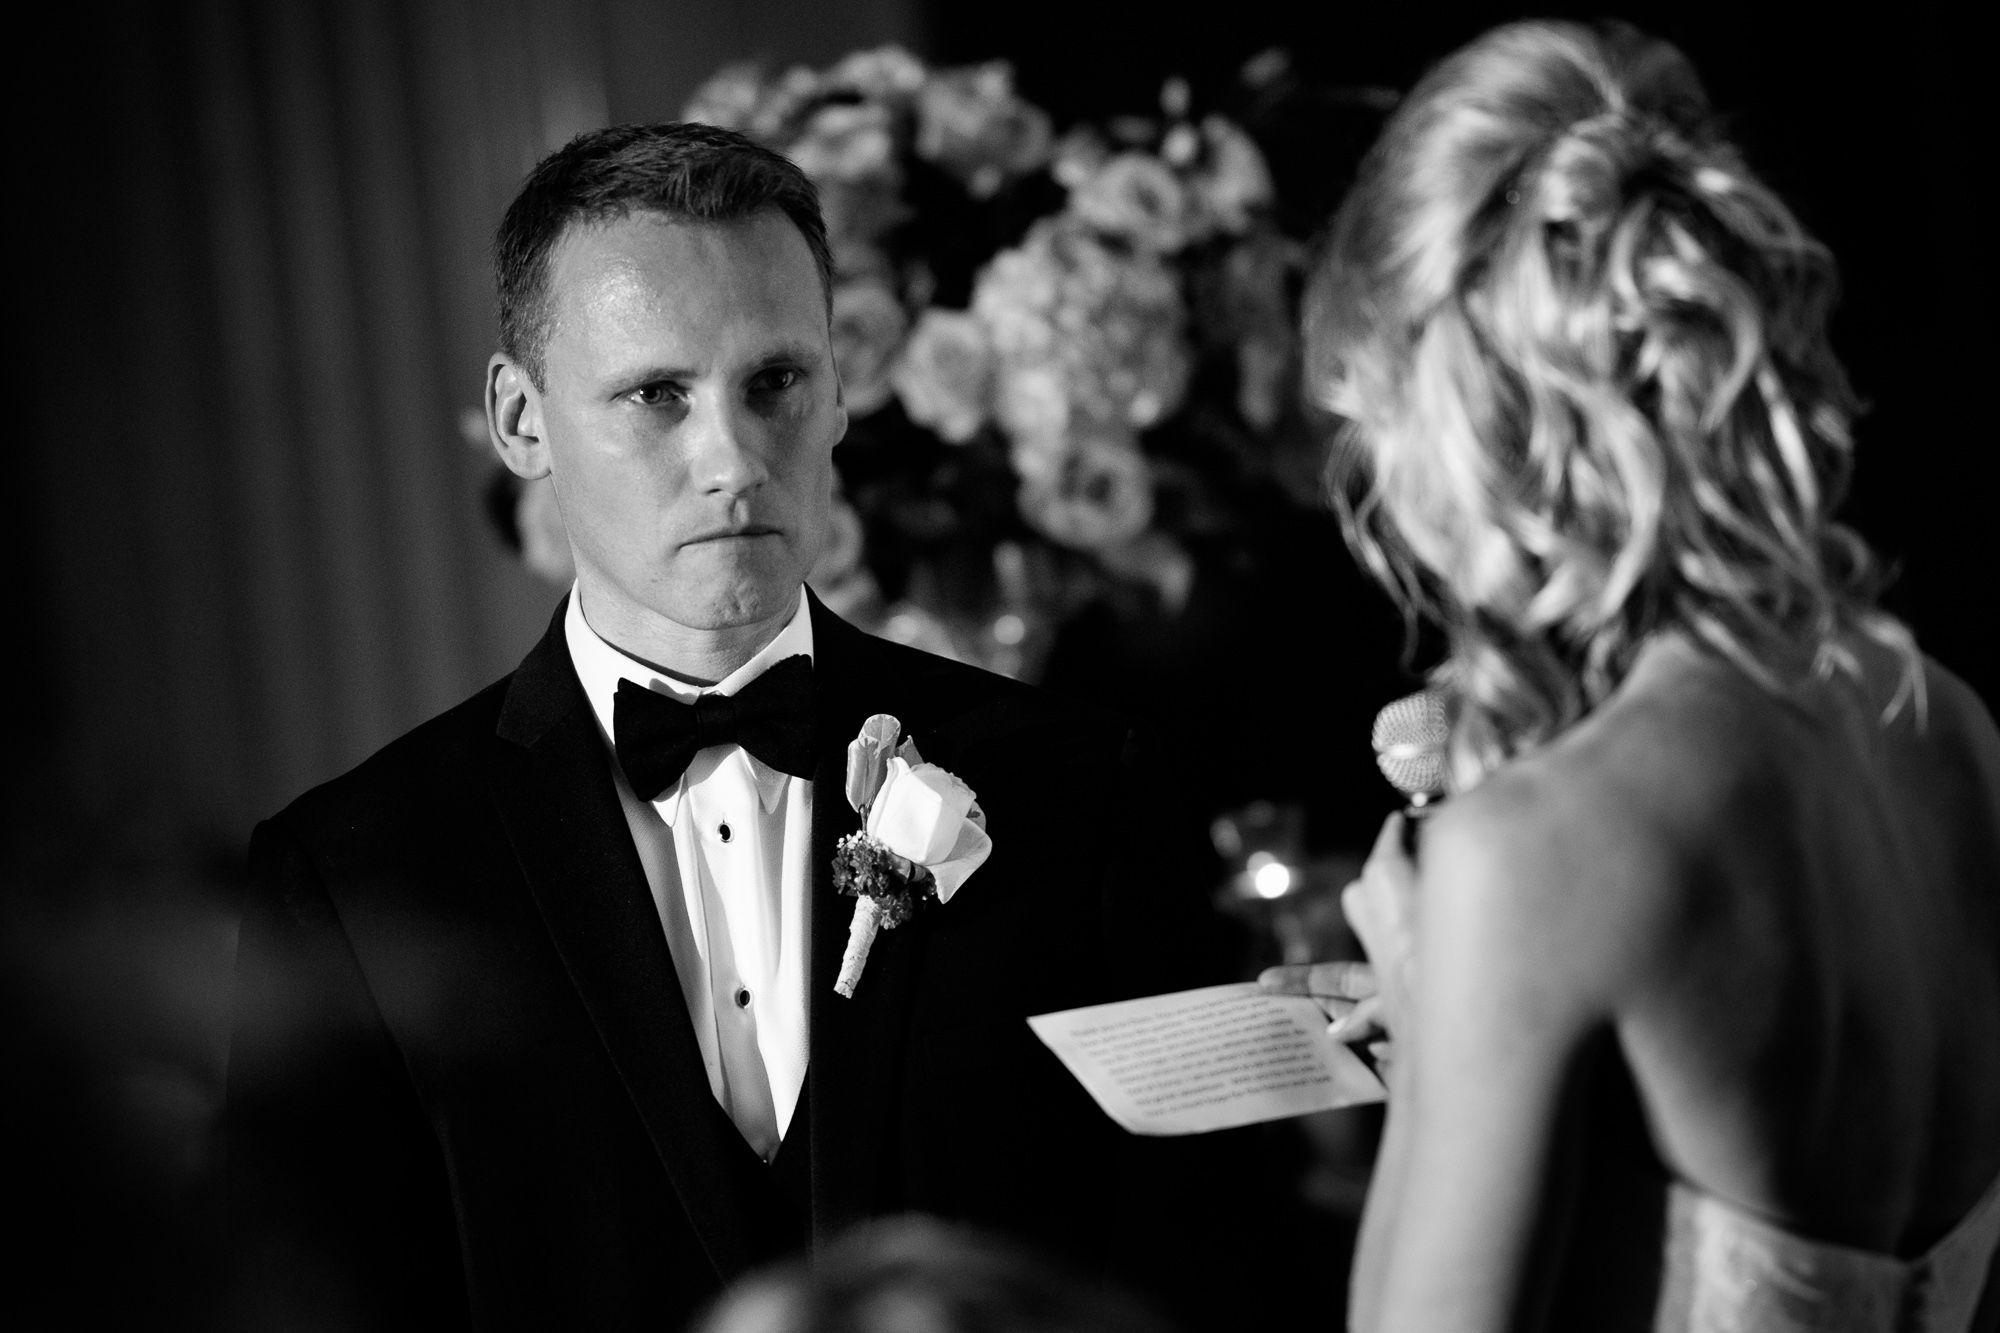  This image is from Andrea + Chris' wedding at One King West.  I love the connection they have as Chris listens to Andrea's speech. 